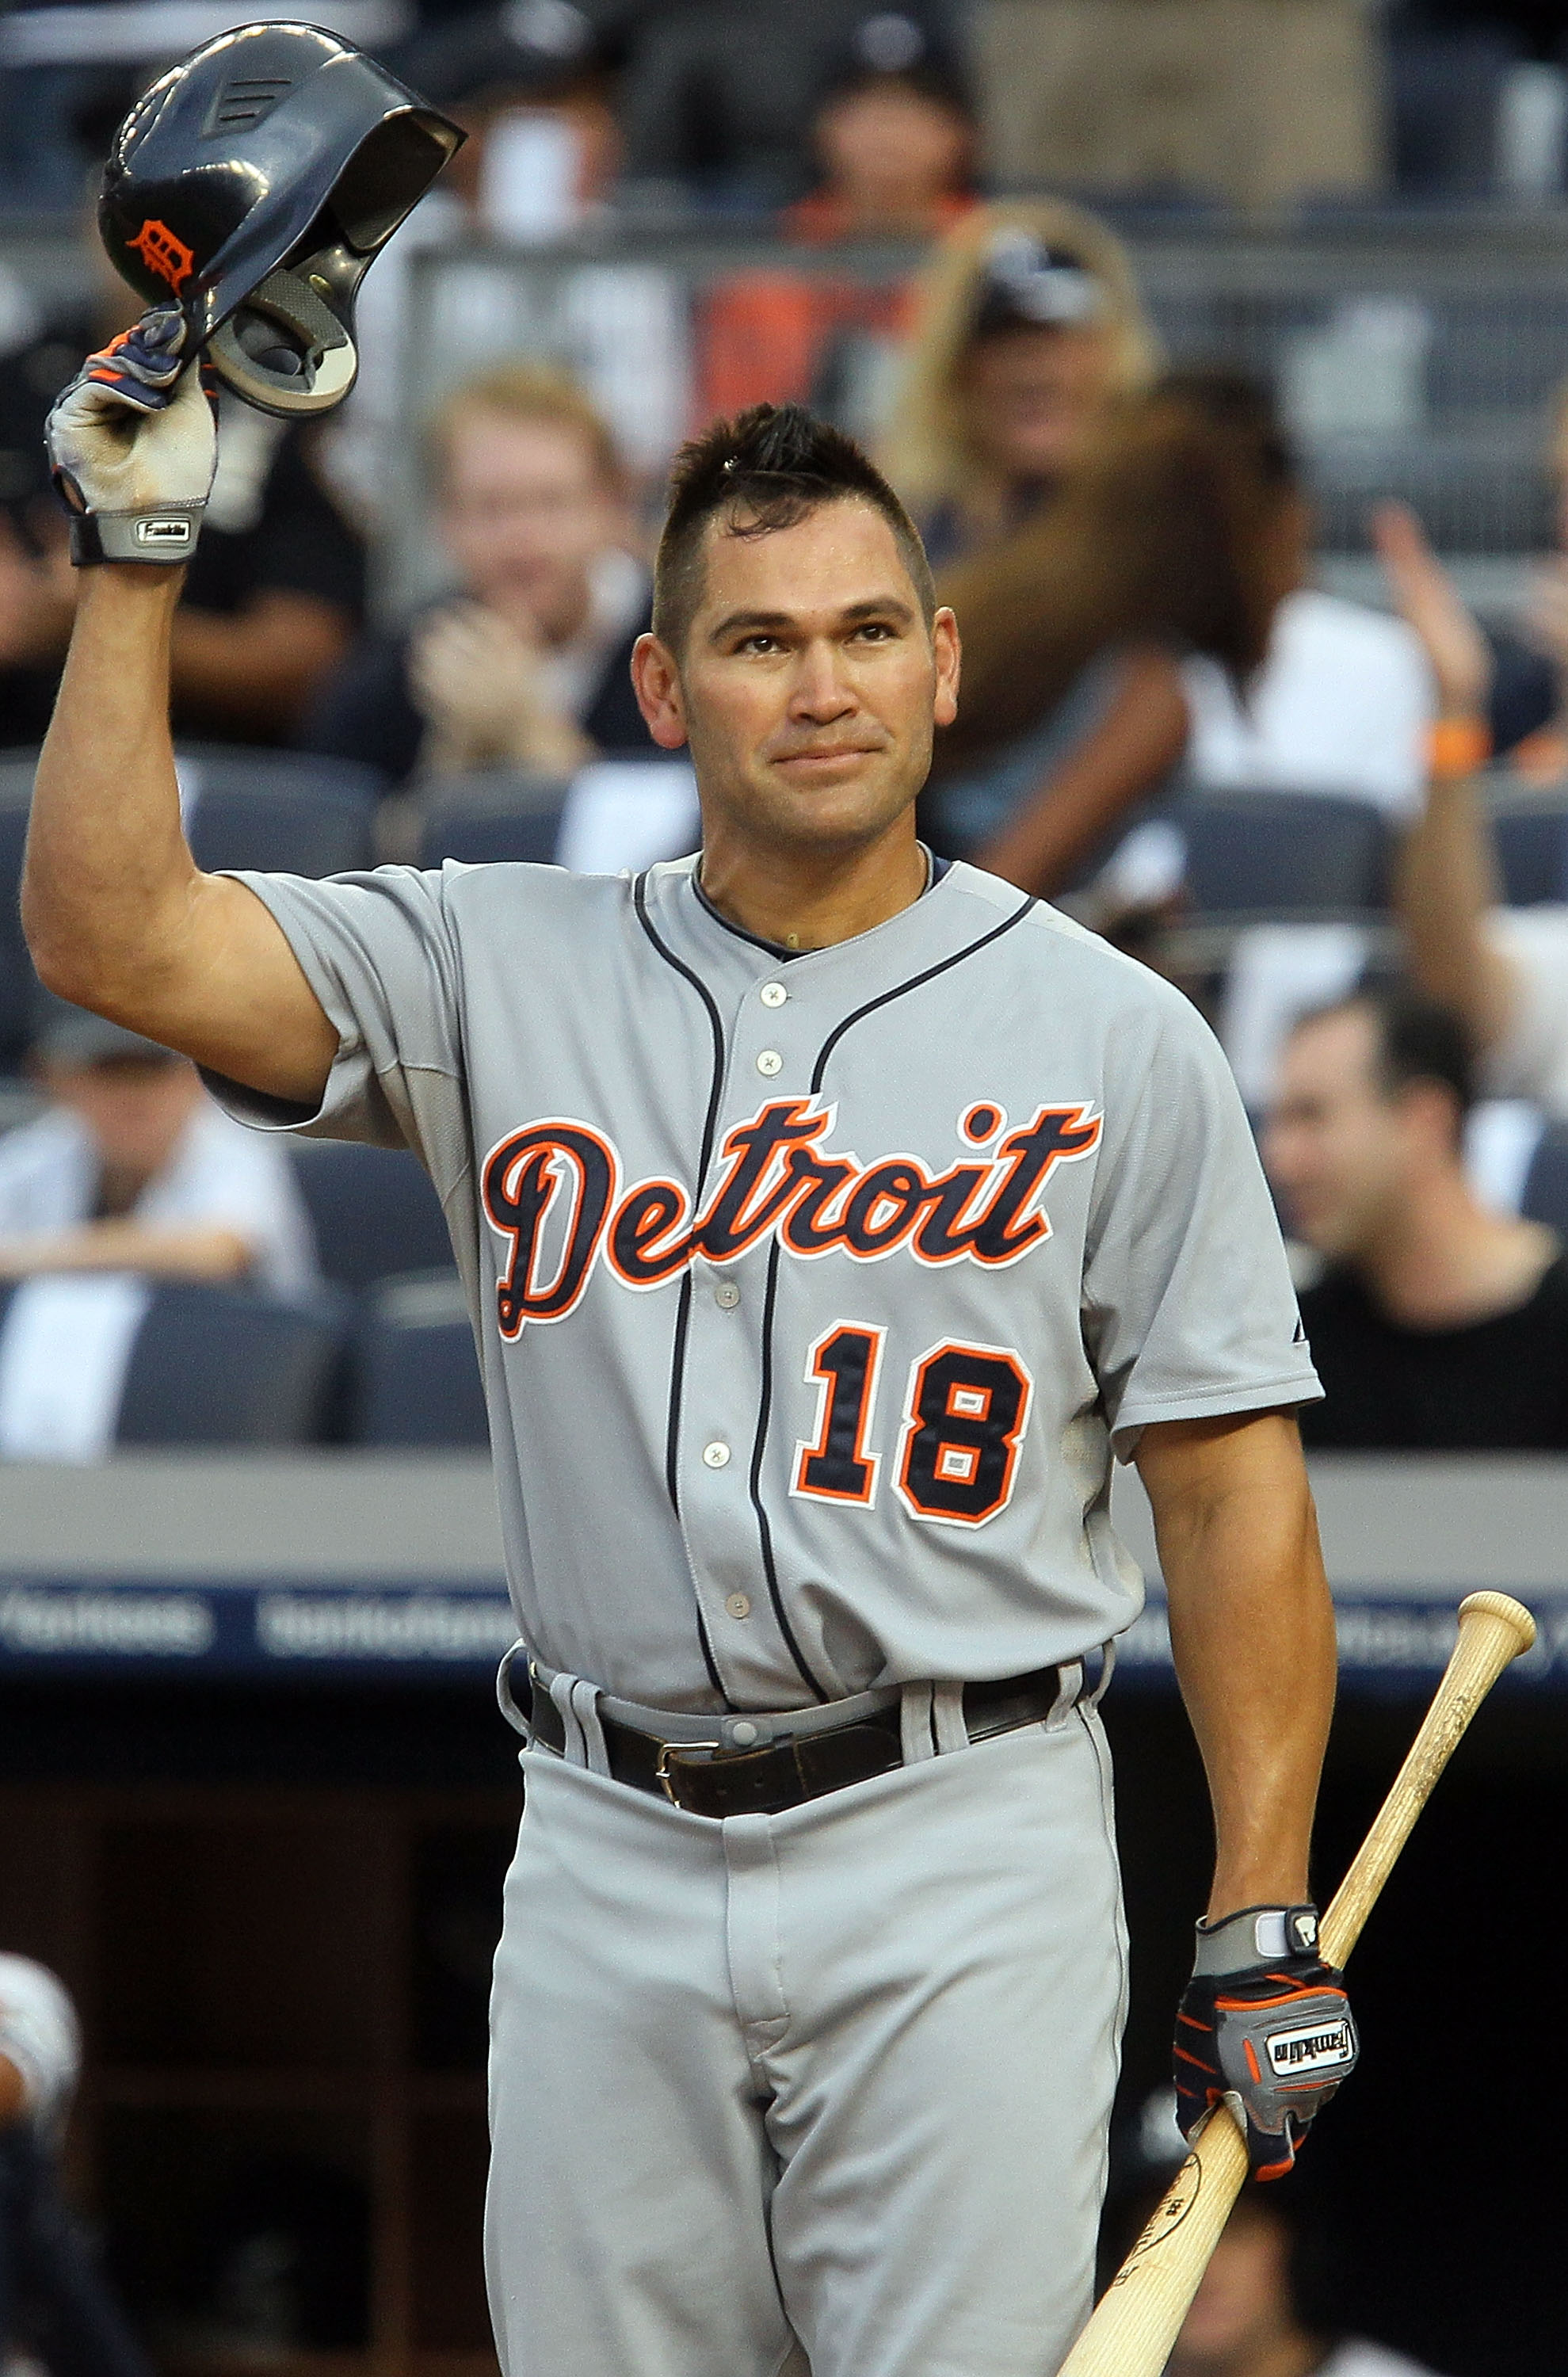 NEW YORK - AUGUST 16:  Johnny Damon #18 of the Detroit Tigers salutes the crowd prior to his first at bat against the New York Yankees on August 16, 2010 at Yankee Stadium in the Bronx borough of New York City.  (Photo by Jim McIsaac/Getty Images)